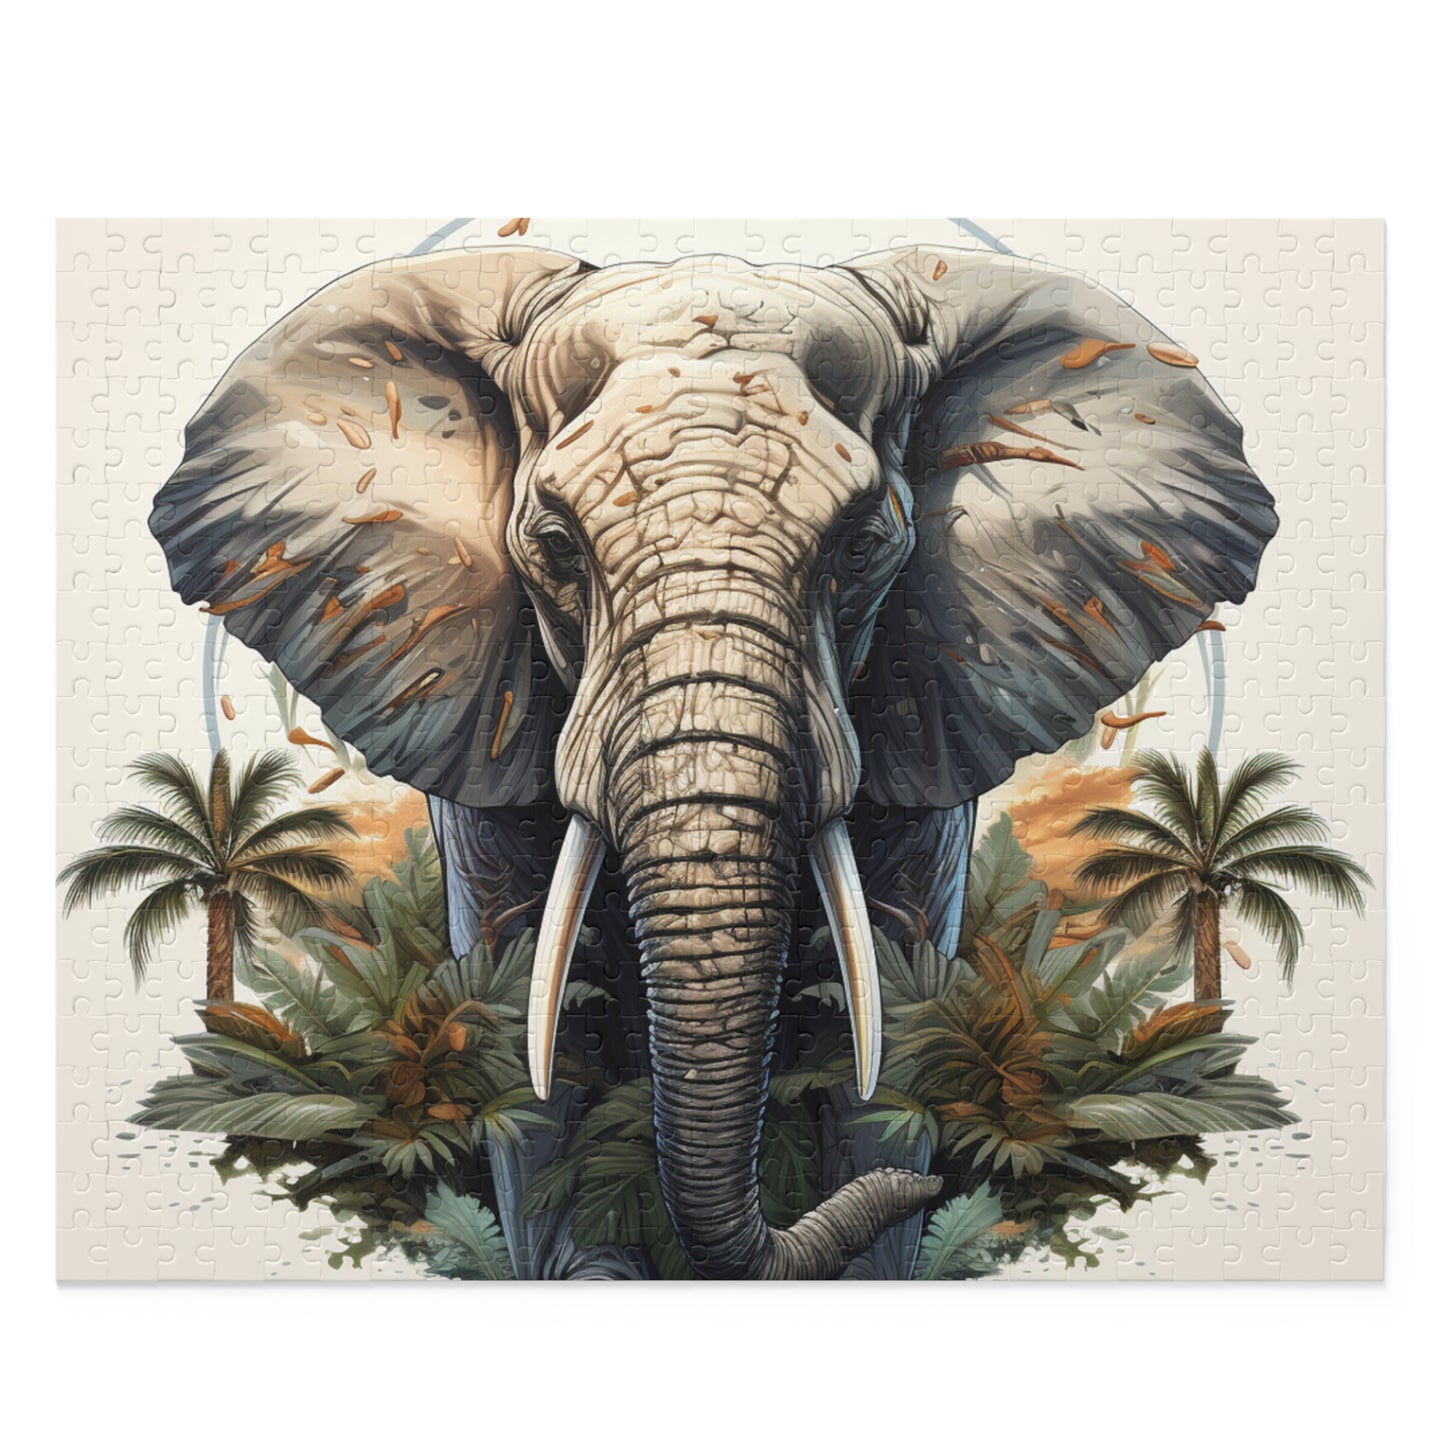 Abstract Elephant Trippy Jigsaw Puzzle for Boys, Girls, Kids Adult Birthday Business Jigsaw Puzzle Gift for Him Funny Humorous Indoor Outdoor Game Gift For Her Online-3